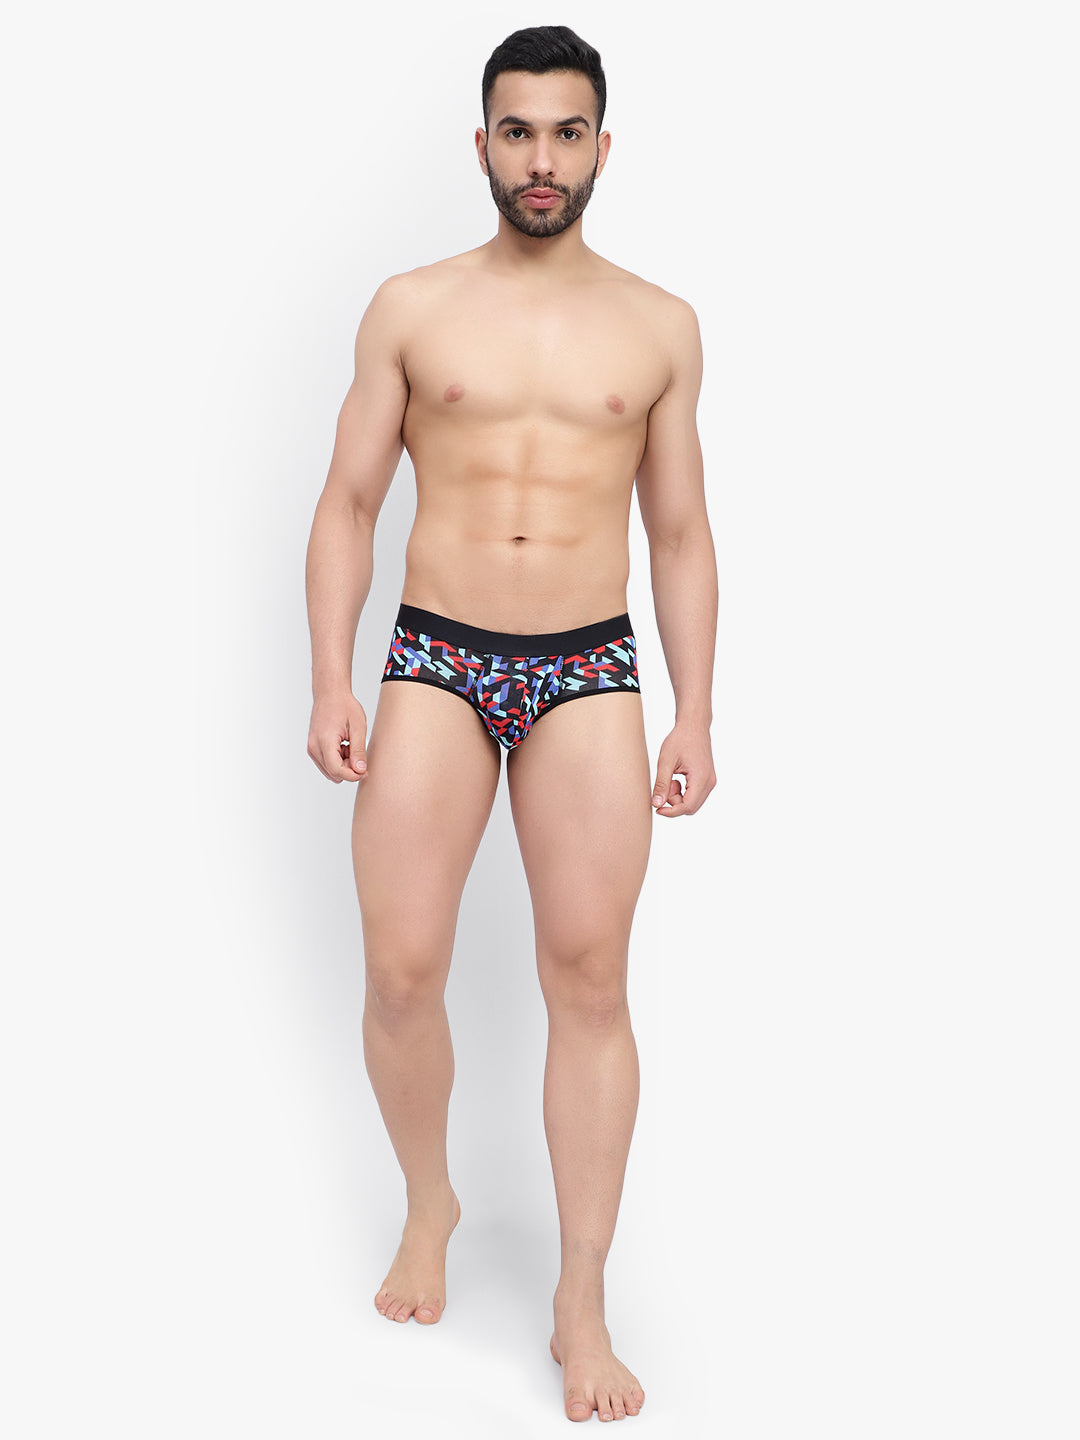 Bruchi Club Antimicrobial Bamboo modal Printed Gen Z Briefs for Men Pack of 2